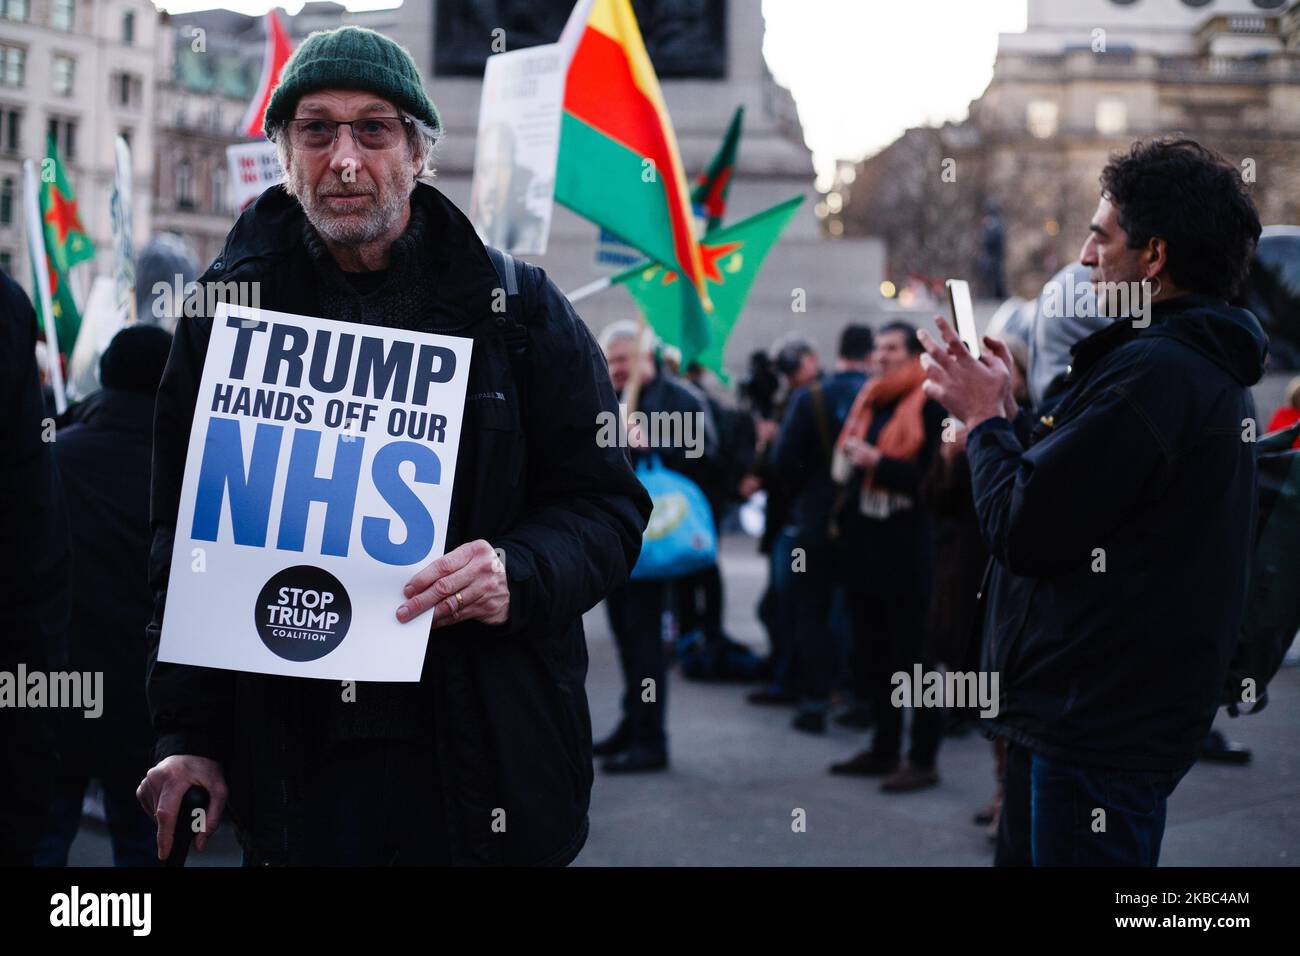 An activist carries a placard opposing any post-Brexit US market access to Britain's National Health Service (NHS) at a protest against US President Donald Trump in Trafalgar Square in London, England, on December 3, 2019. President Trump arrived in the UK on a three-day visit last night, chiefly to attend tomorrow's NATO summit in Watford. He is tonight attending a reception for NATO leaders with Queen Elizabeth at Buckingham Palace. Trump today stated that he wanted 'absolutely nothing' to do with the NHS when asked if it would form part of any post-Brexit trade talks. (Photo by David Cliff/ Stock Photo